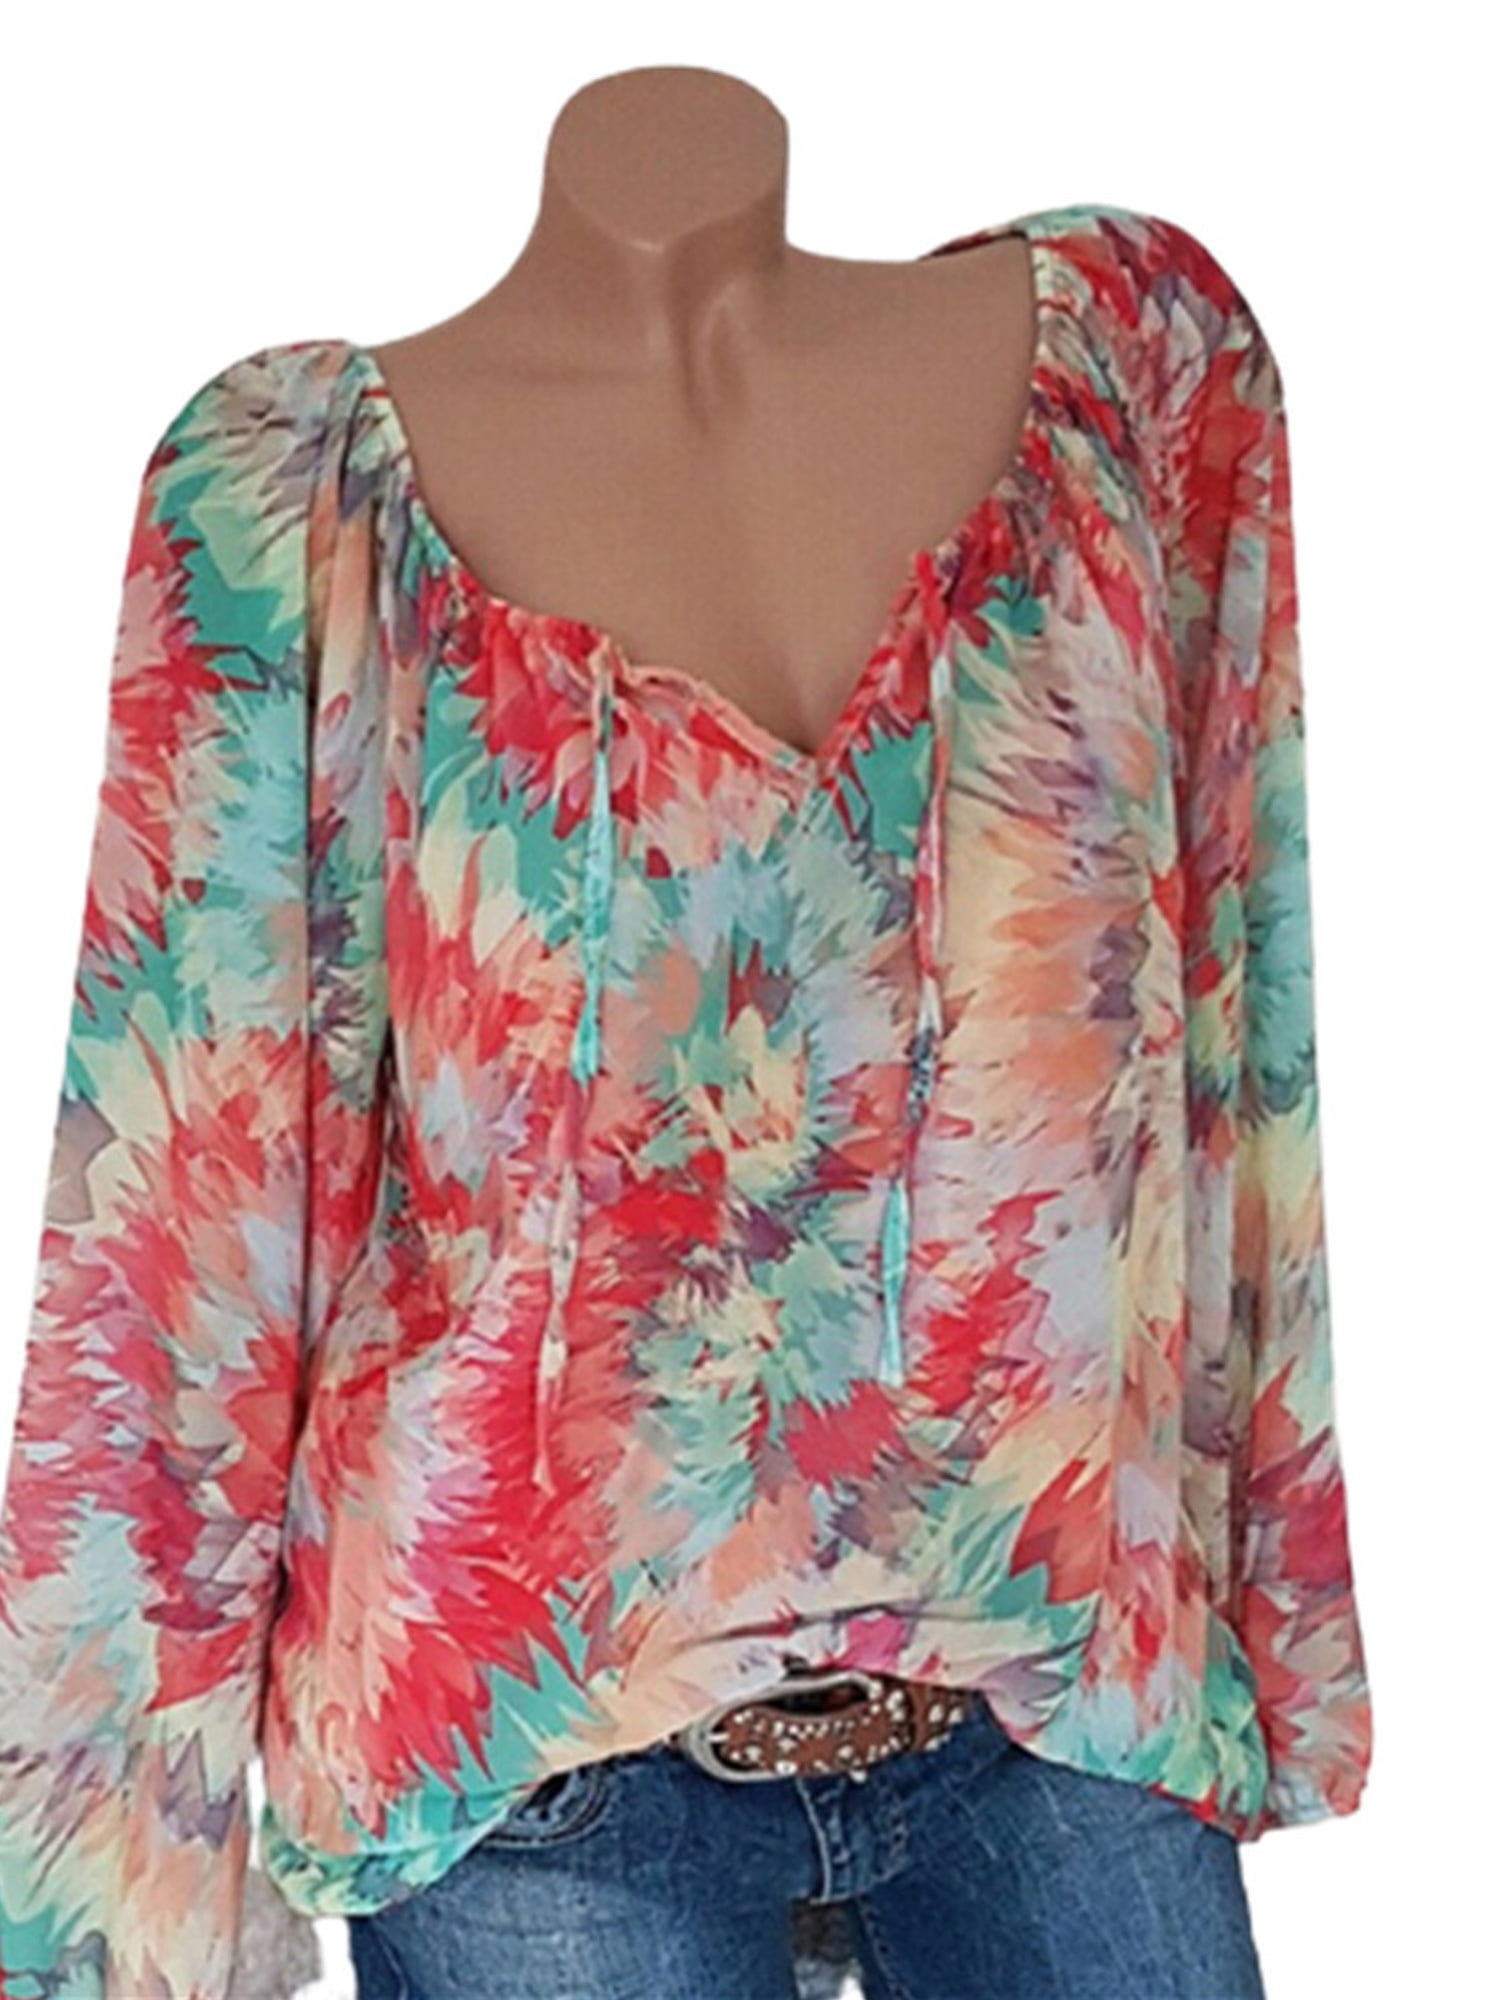 Womens Floral Long Sleeve T-Shirt Tunic Tops Ladies Casual V Neck Blouse Tee Top